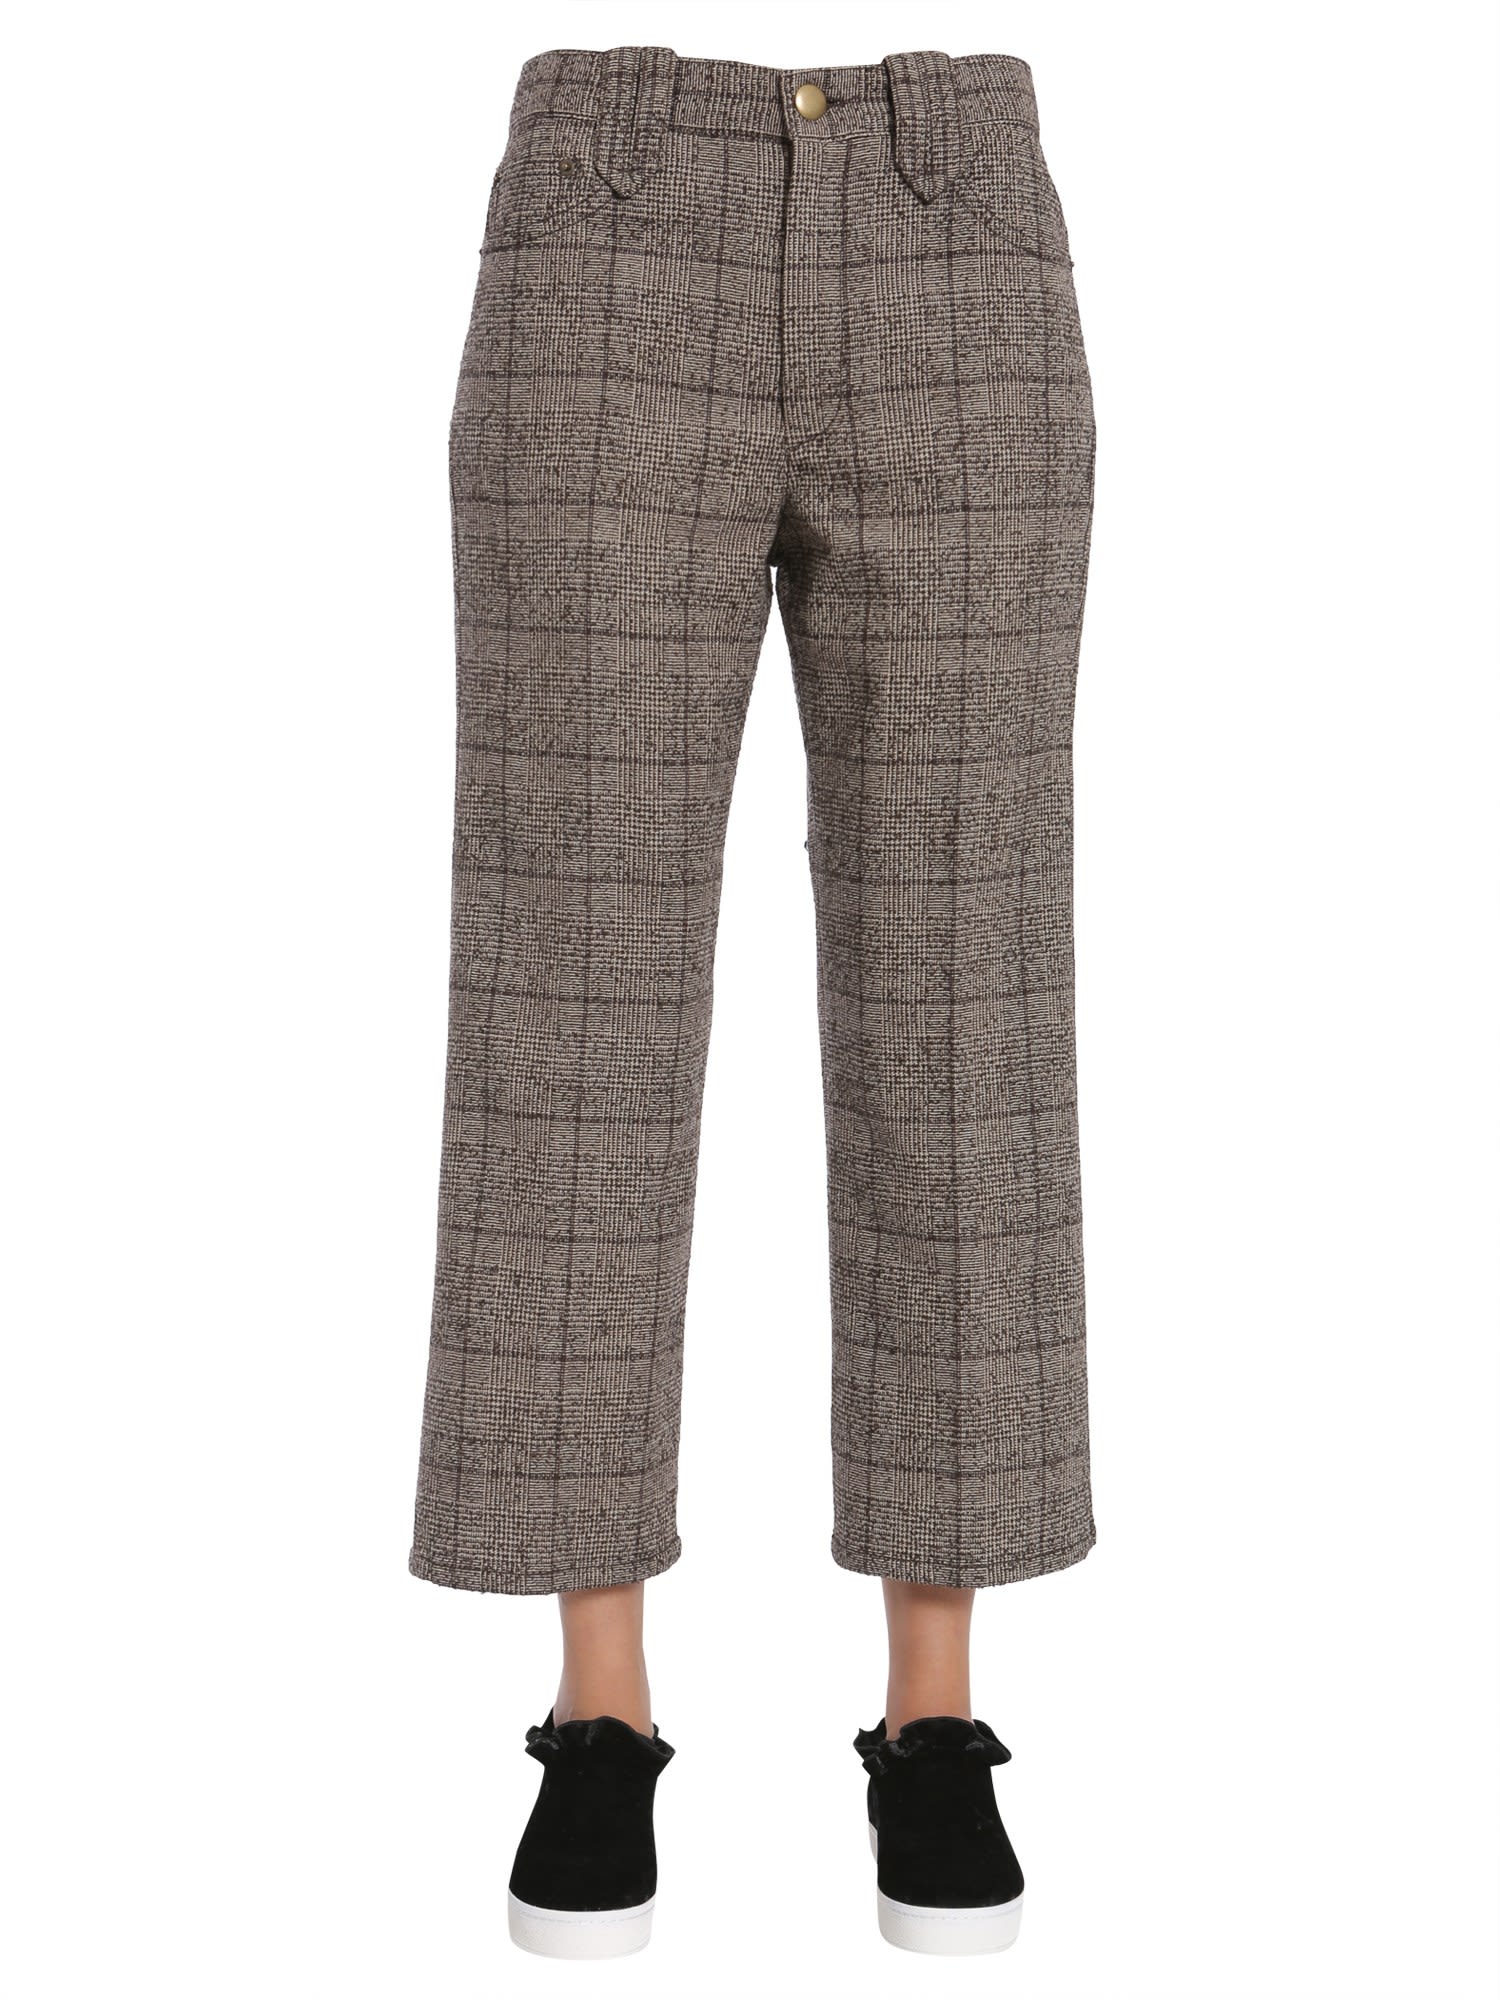 Marc Jacobs Cropped Trousers